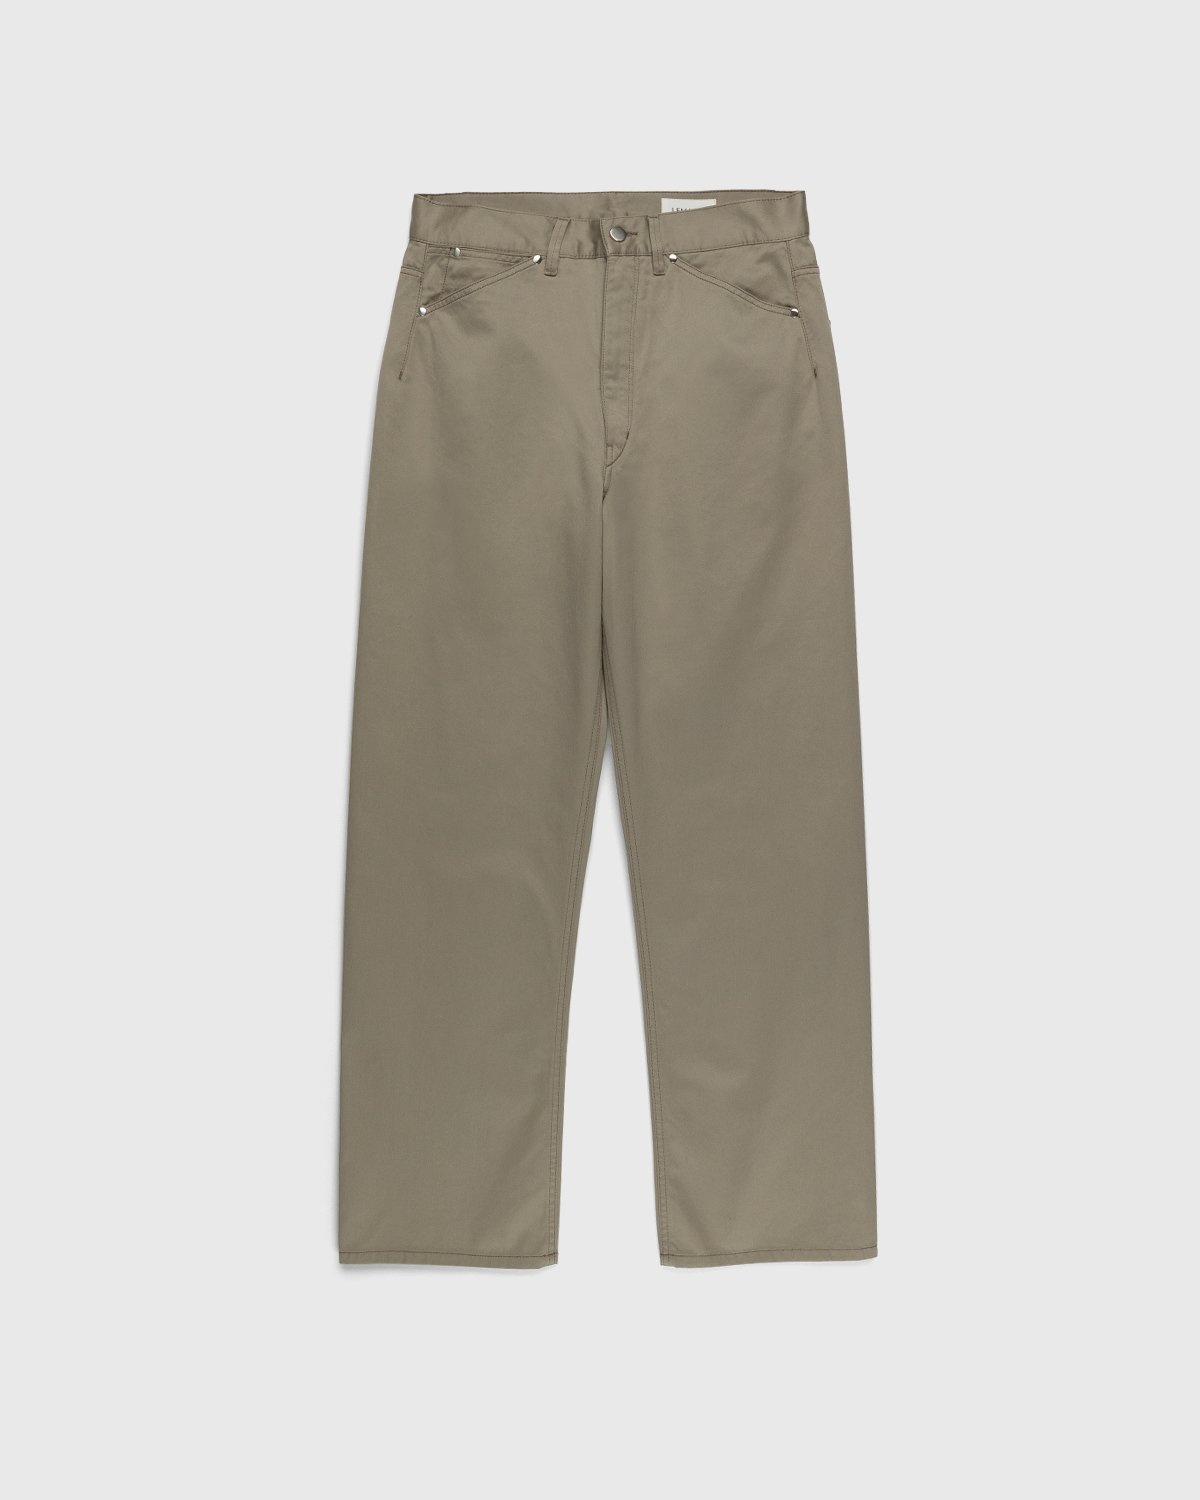 Lemaire – Seamless Pants Light Taupe - Pants - Beige - Image 1